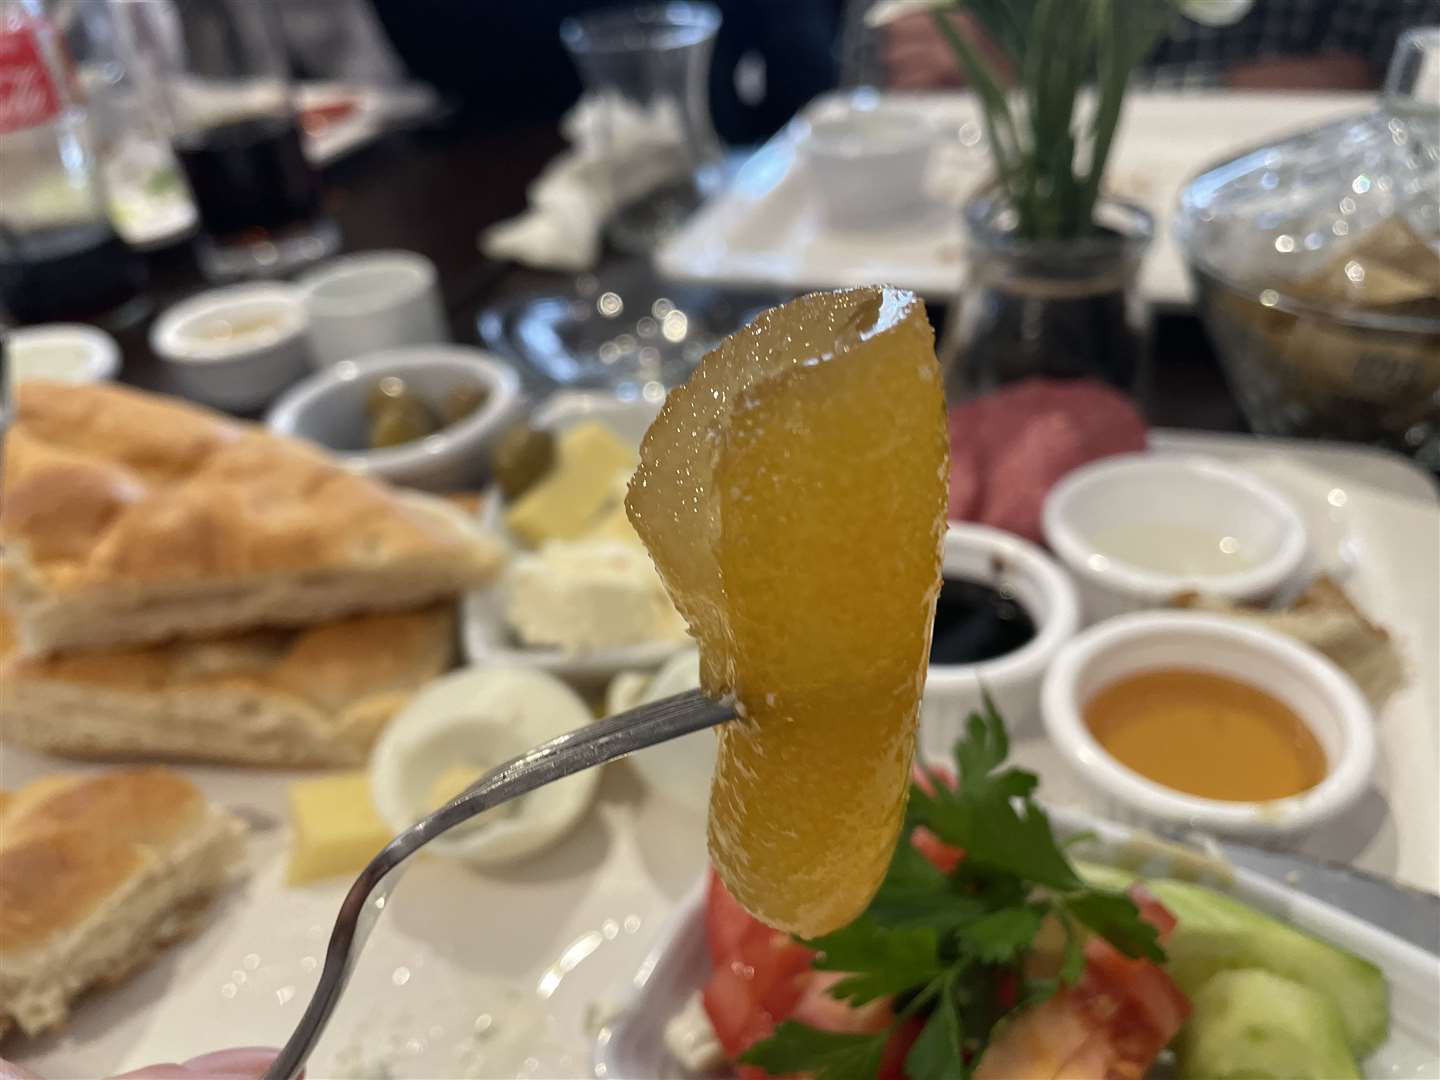 The Cypriotic Breakfast was served with candied apricot